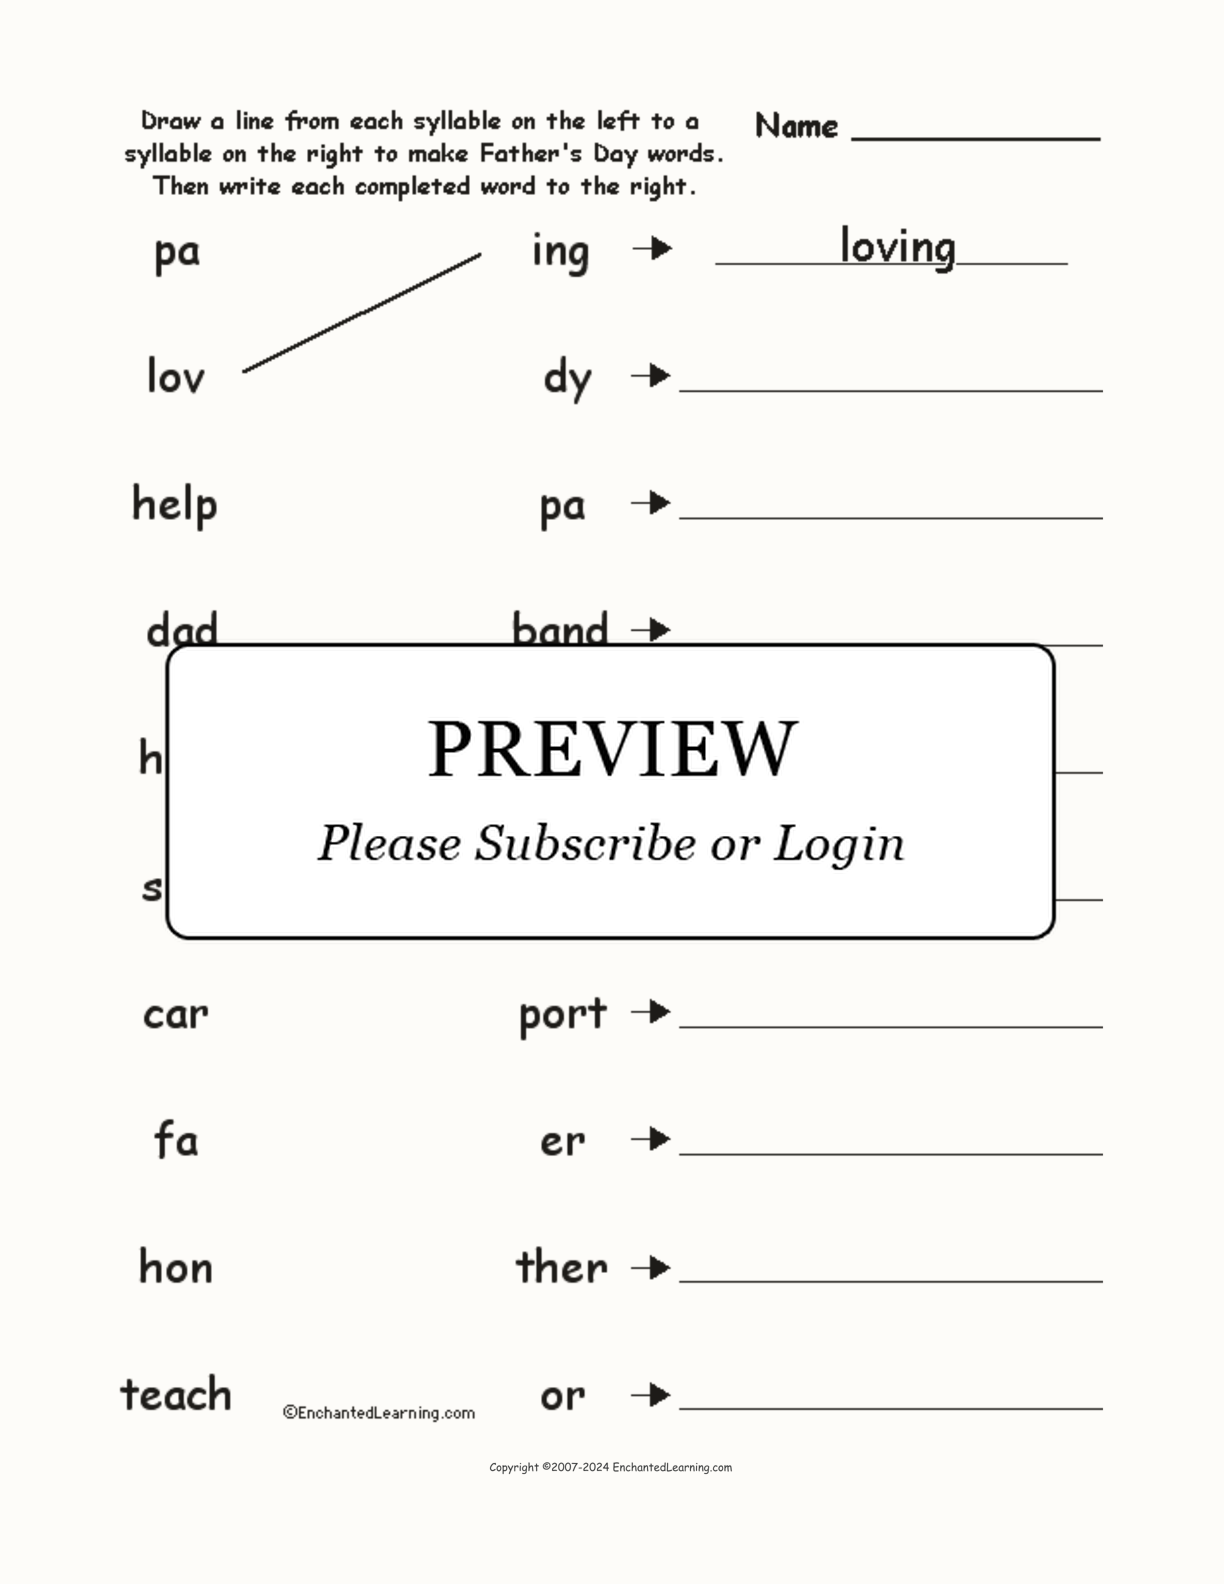 Match the Syllables: Father's Day Words interactive worksheet page 1